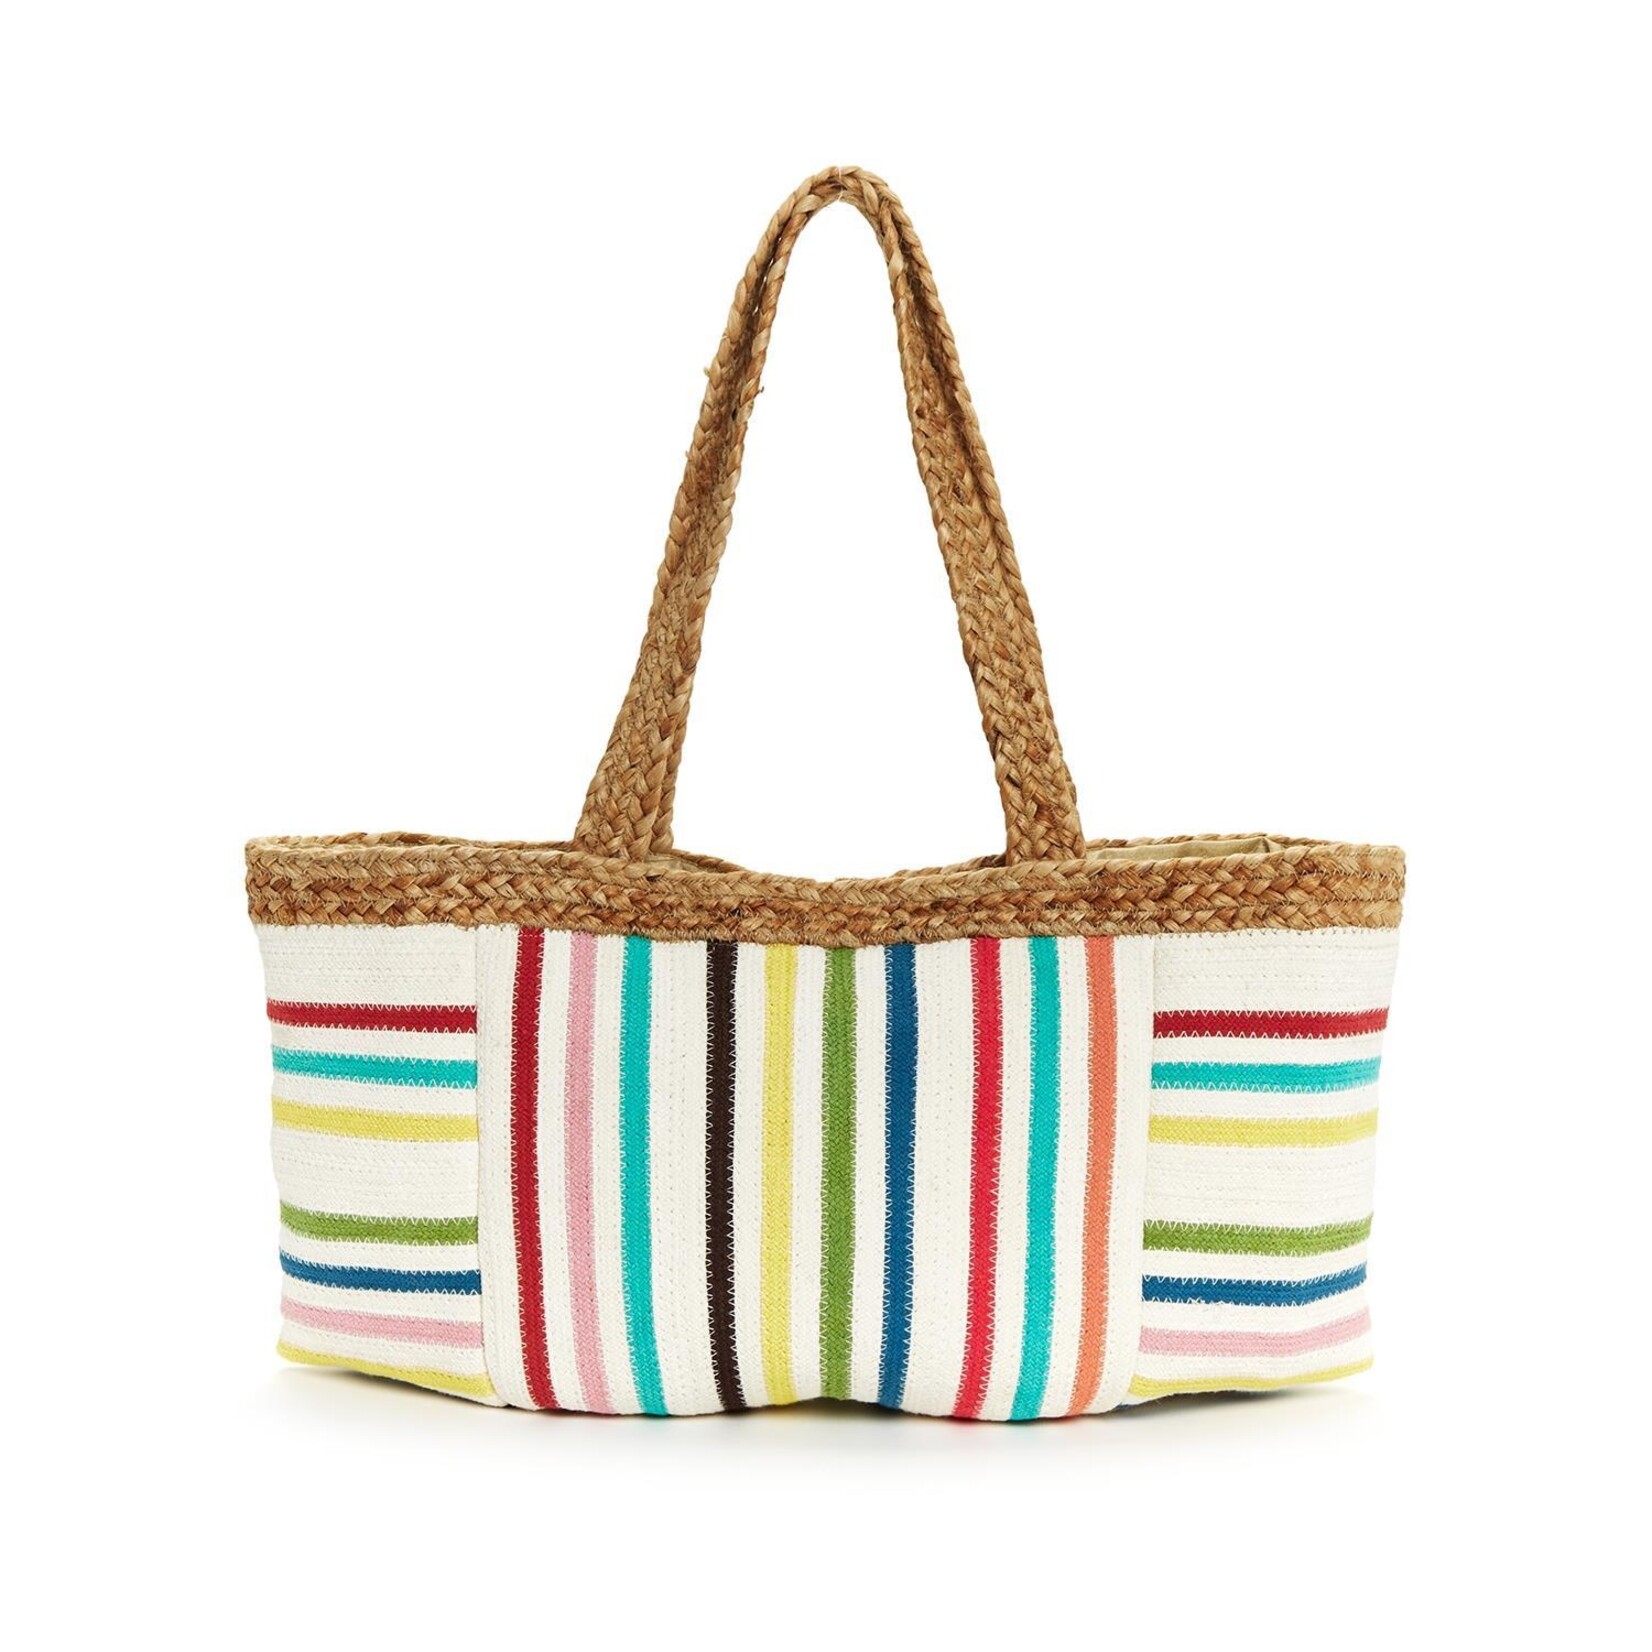 Two's Company, Inc. Powerful Stripes Multi Colored Stripes Woven Jute Tote Bag with Snap Closure and Lined Interior